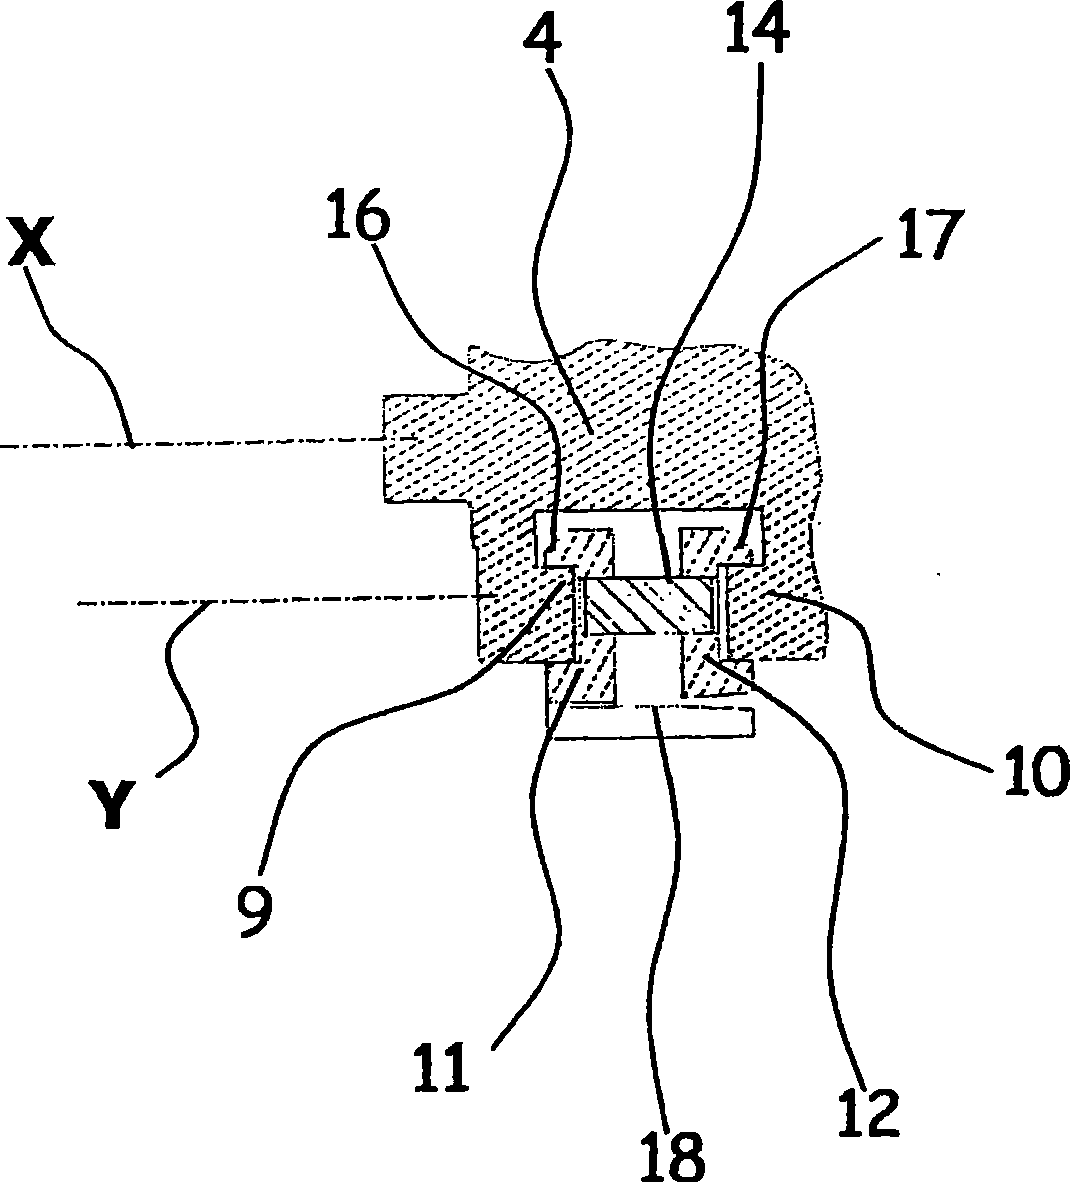 Electrical switchgear with rotating mobile contact(s)